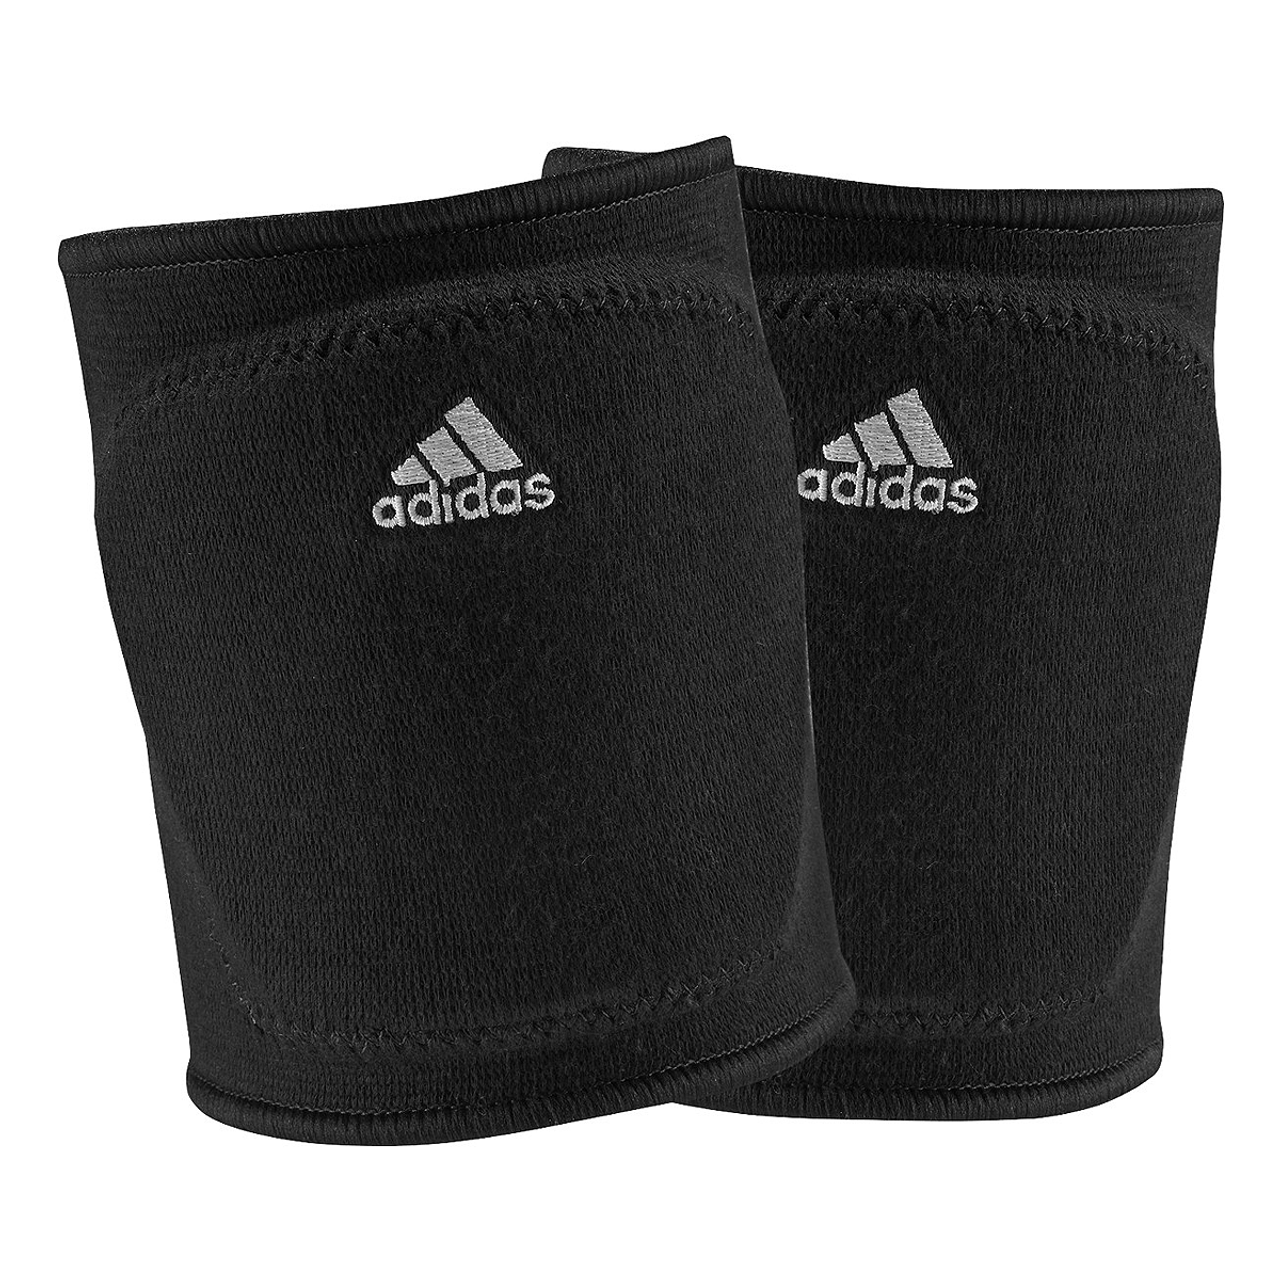 adidas knee pads volleyball near me 